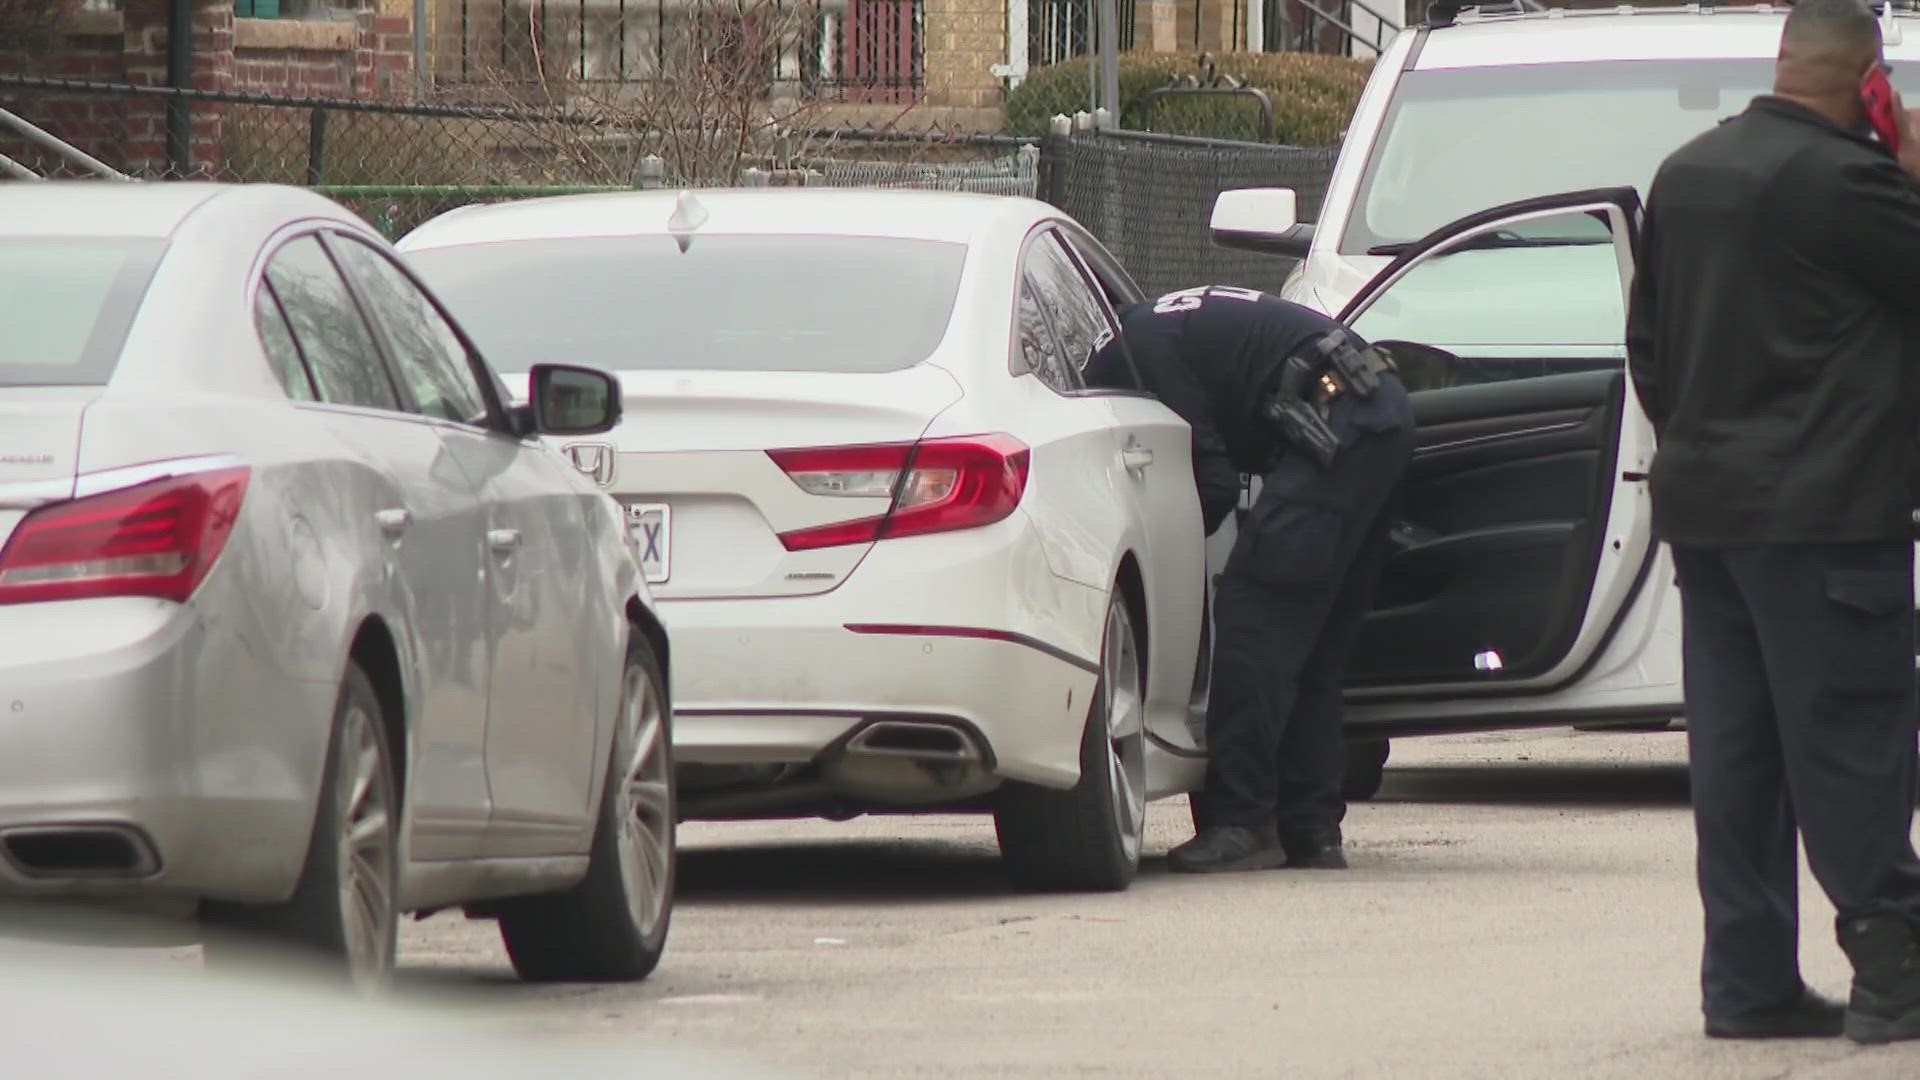 St. Louis police and juvenile courts came to agreement on how to tackle the issue of teen-involved carjackings and crime.